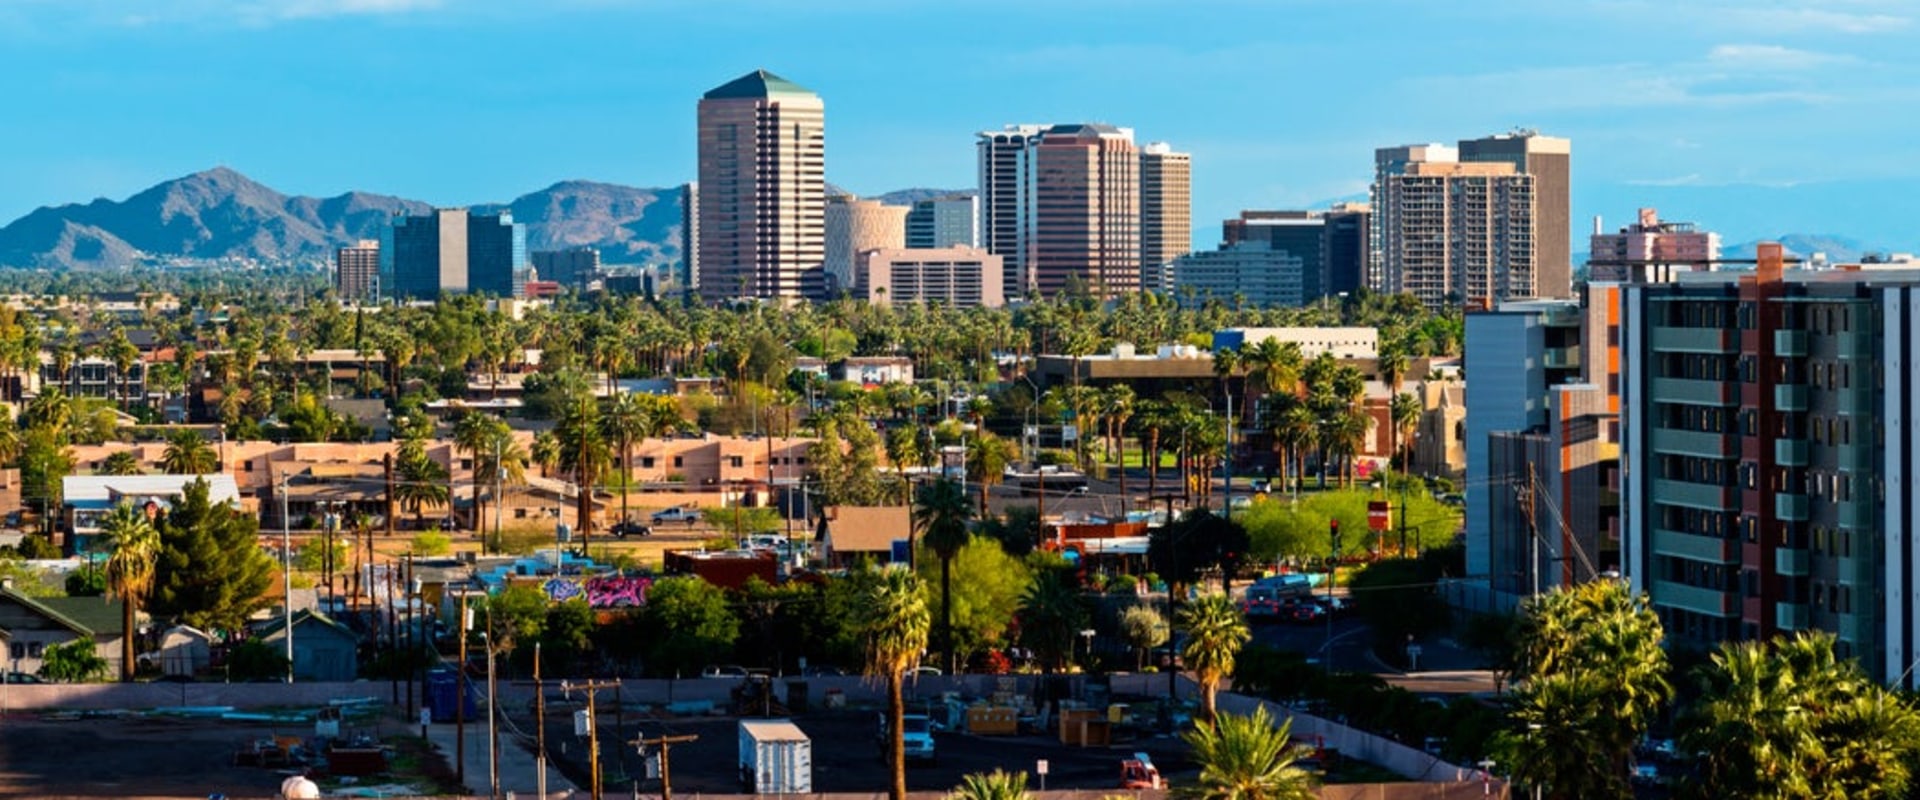 The Best Companies to Work for in Scottsdale, AZ